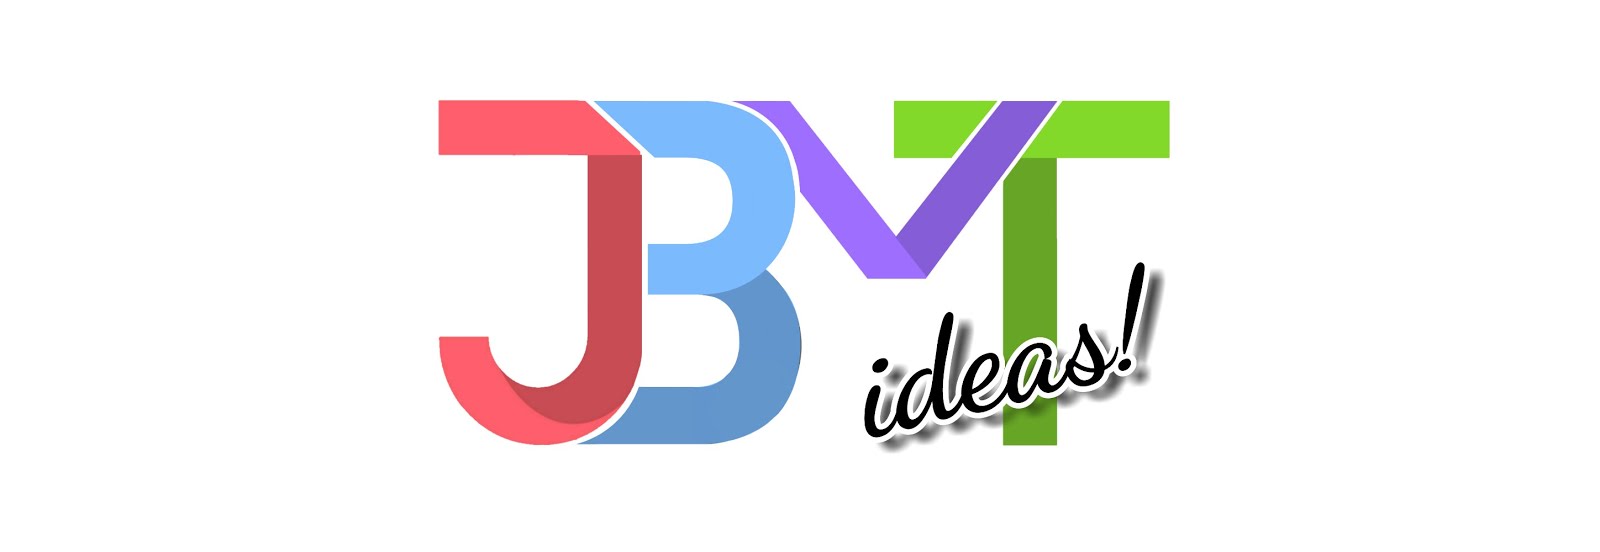 JBMT ideas! - Tech, Gaming and Much More!